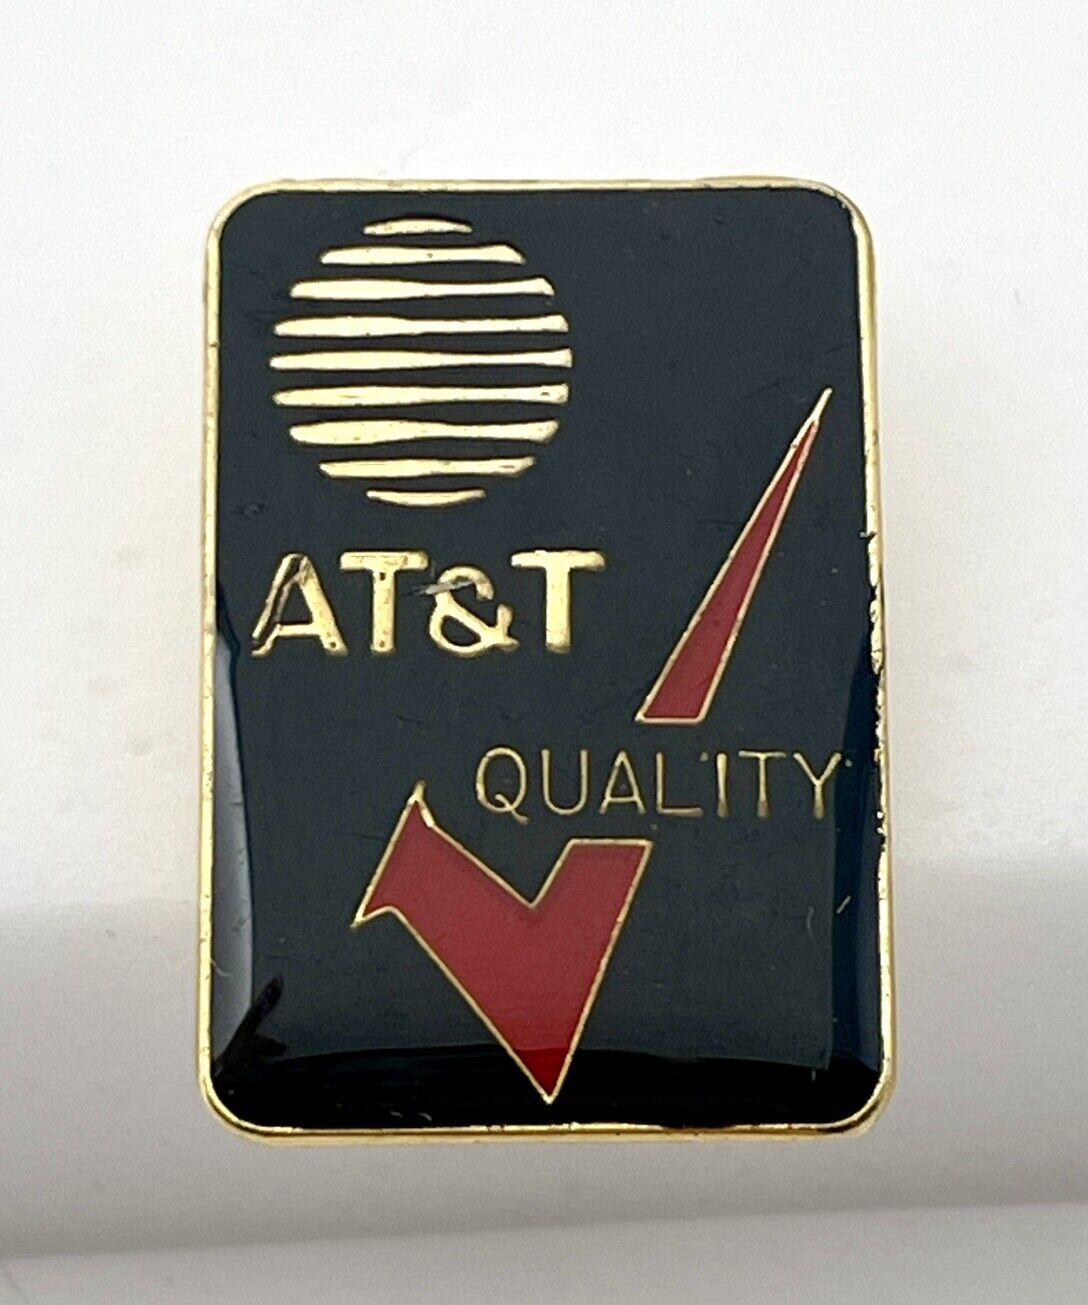 Vintage AT&T Quality Lapel Pin - Red Check Mark - Perfect Service Award